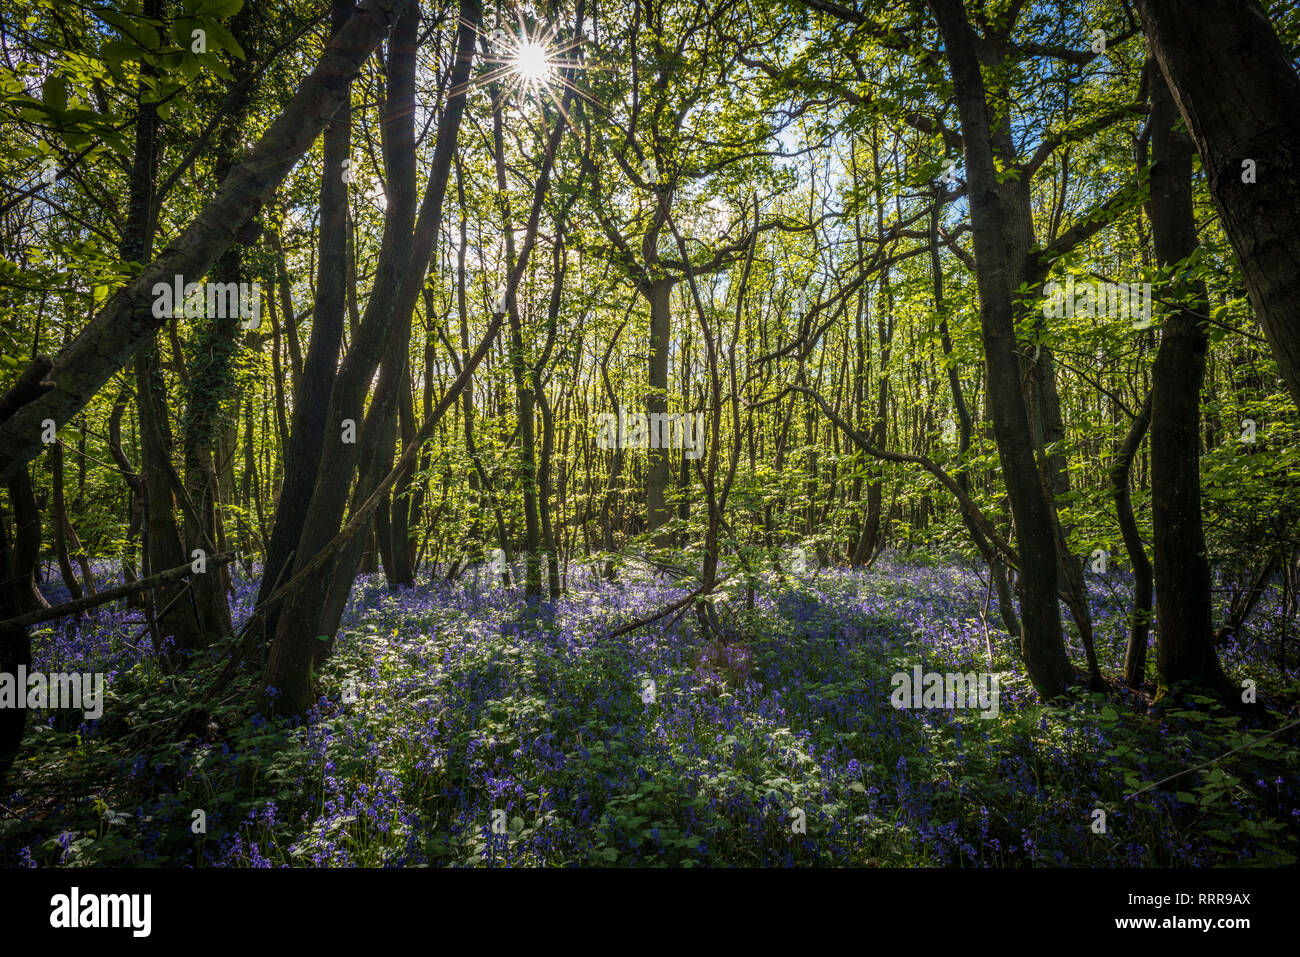 Bluebells in King's Wood near Challock in the Kent Downs AONB Stock Photo